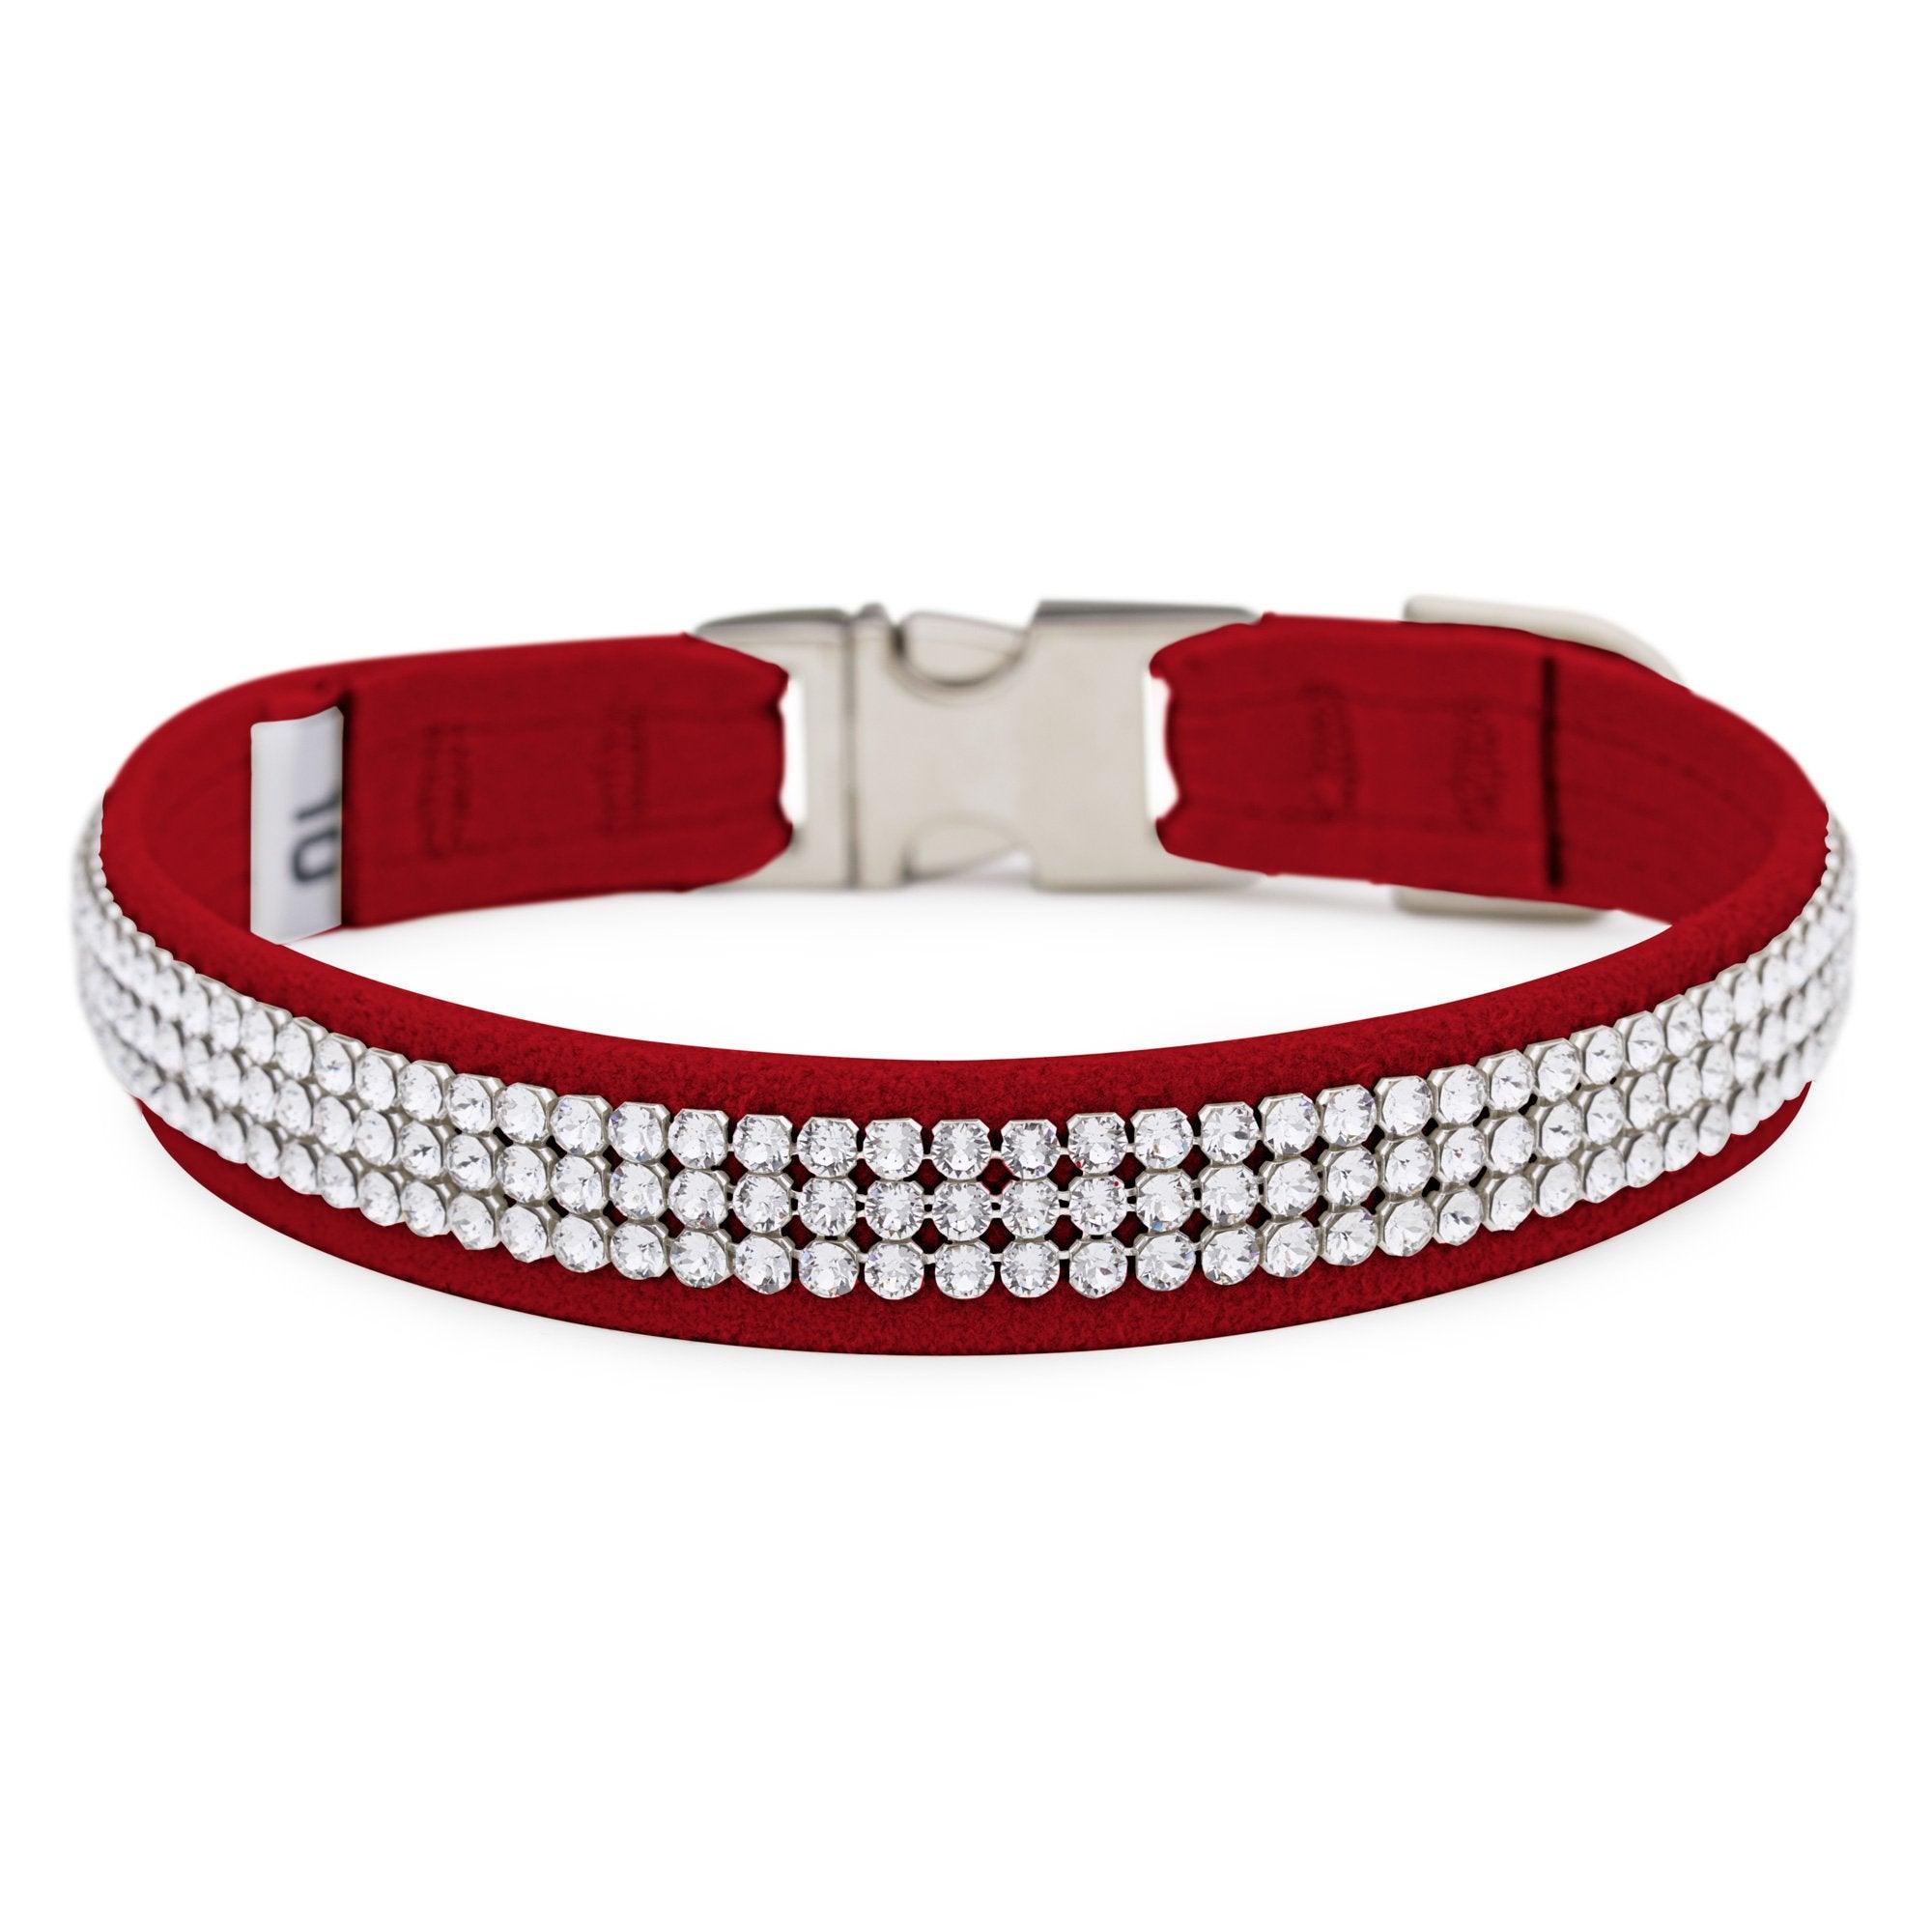 Red 3 Row Giltmore Perfect Fit Collar - Rocky & Maggie's Pet Boutique and Salon